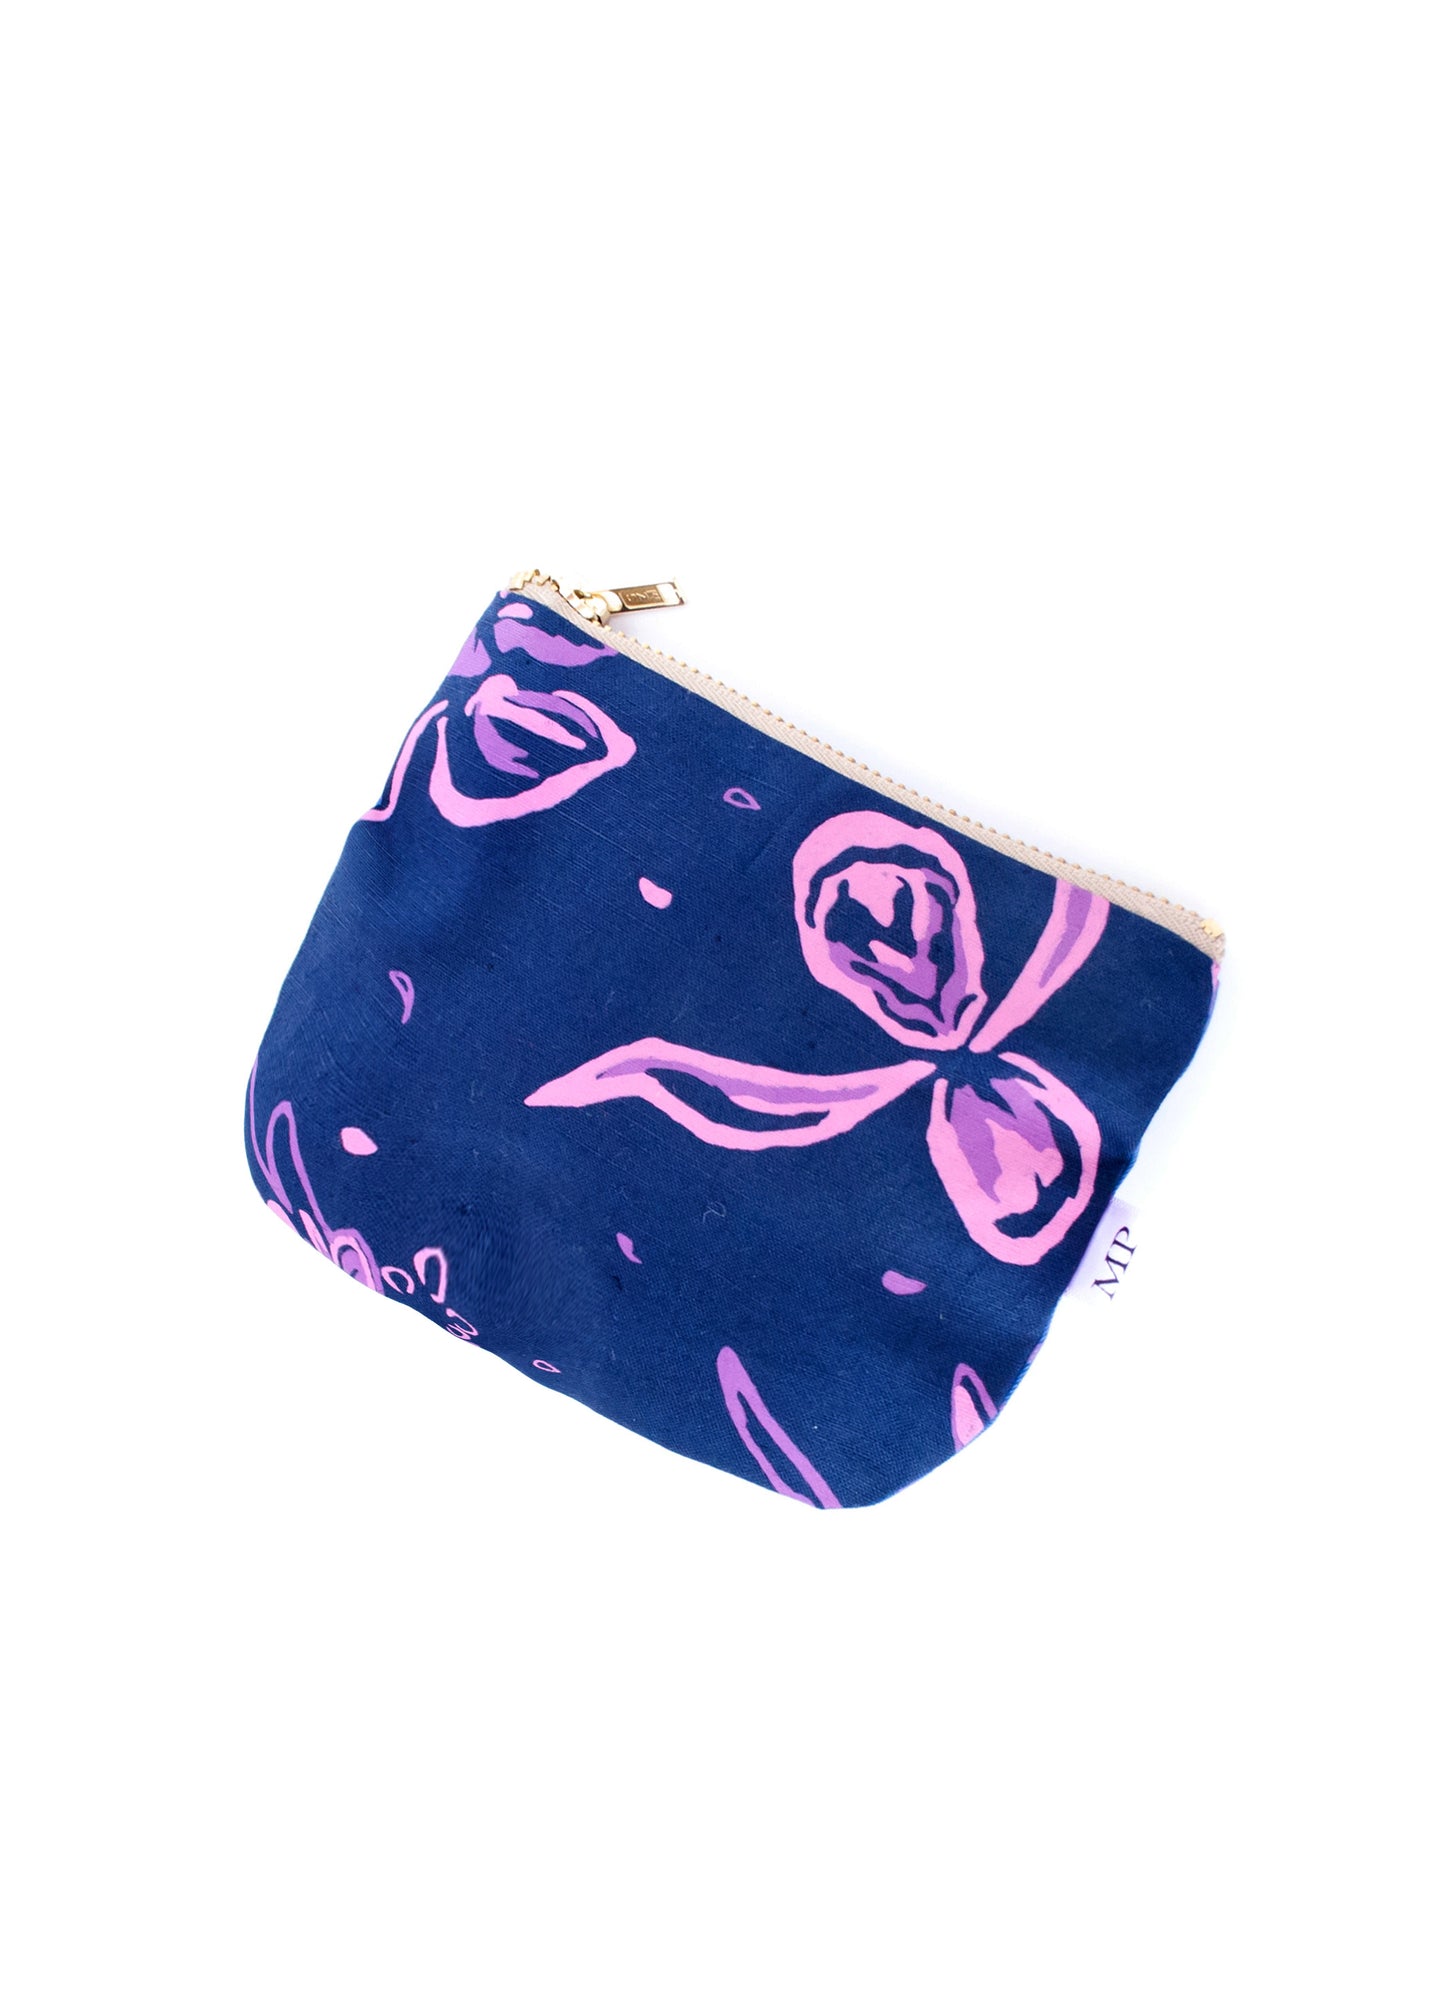 The Megan purse in bluebell Thai Floral print